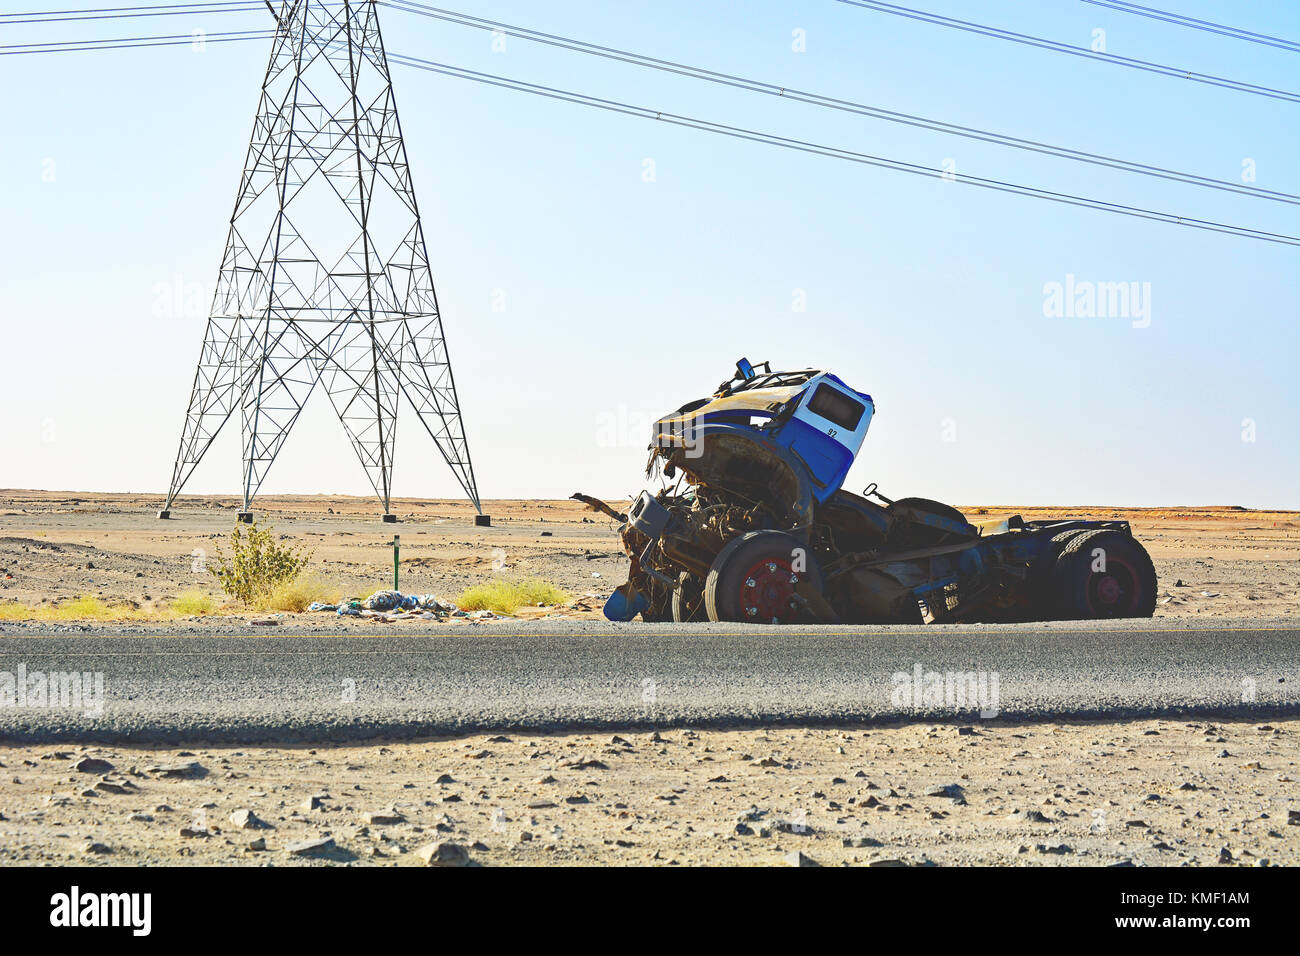 Wreckage on the road to Mecca in Al Lith near the Red Sea, south of Jeddah. Serves as a warning to reckless driving. Stock Photo